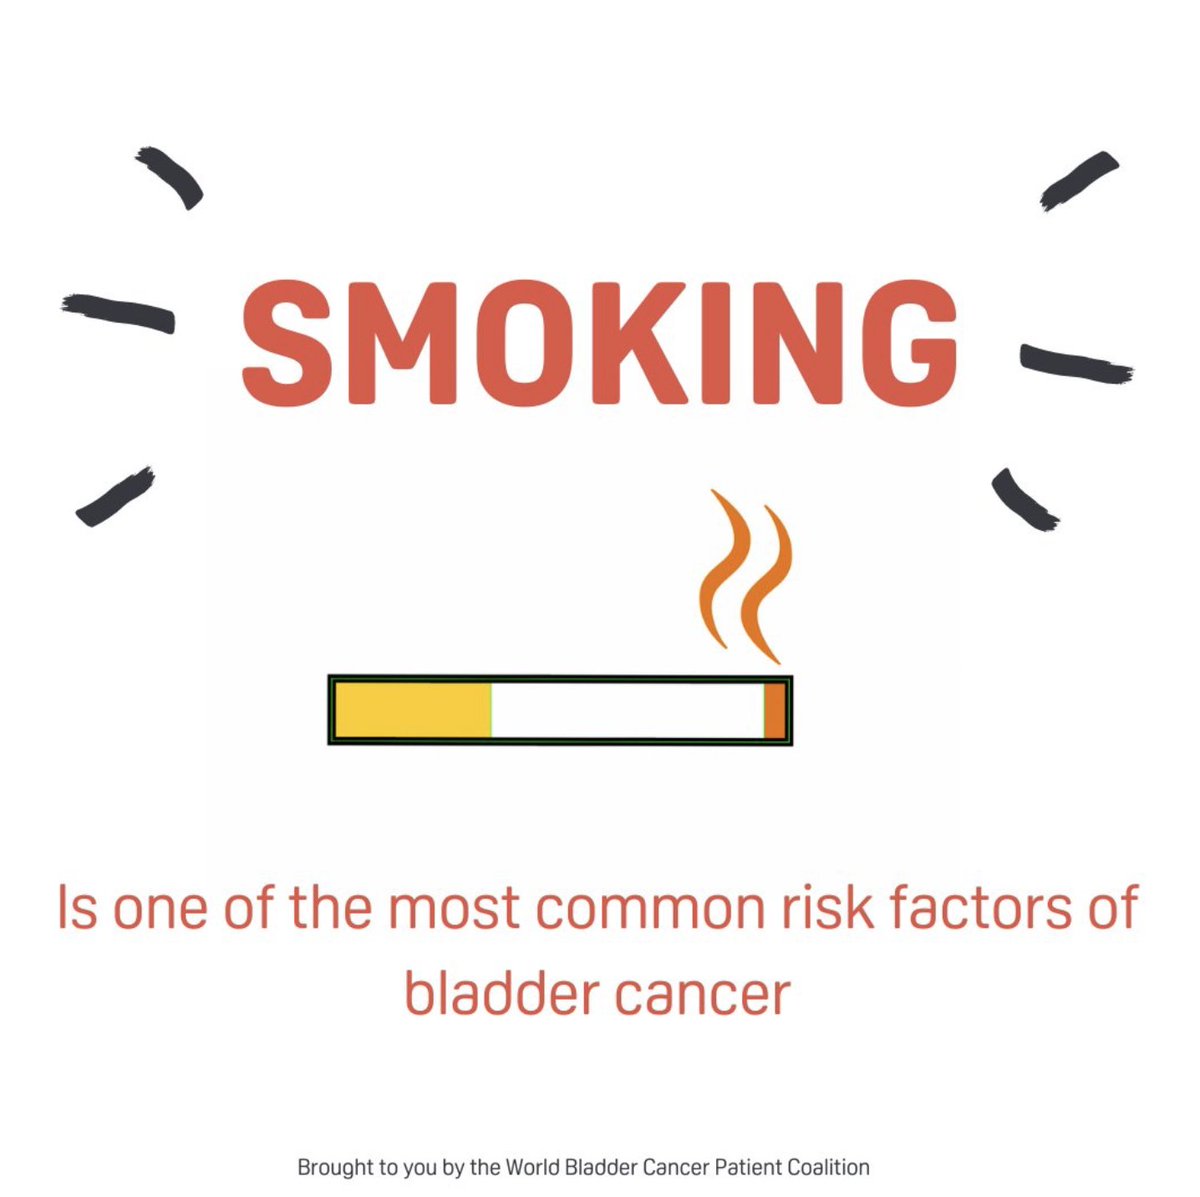 📣 Today is #WorldNoTabaccoDay

🚬 is the biggest risk factor of #bladdercancer. Persons who smoke may be up to 4 times more likely to develop bladder cancer than non-smokers.

Learn more  & stay #BladderCancerAware!

👉 ow.ly/wXGP50Oi65c

#BladderCancerMonth24